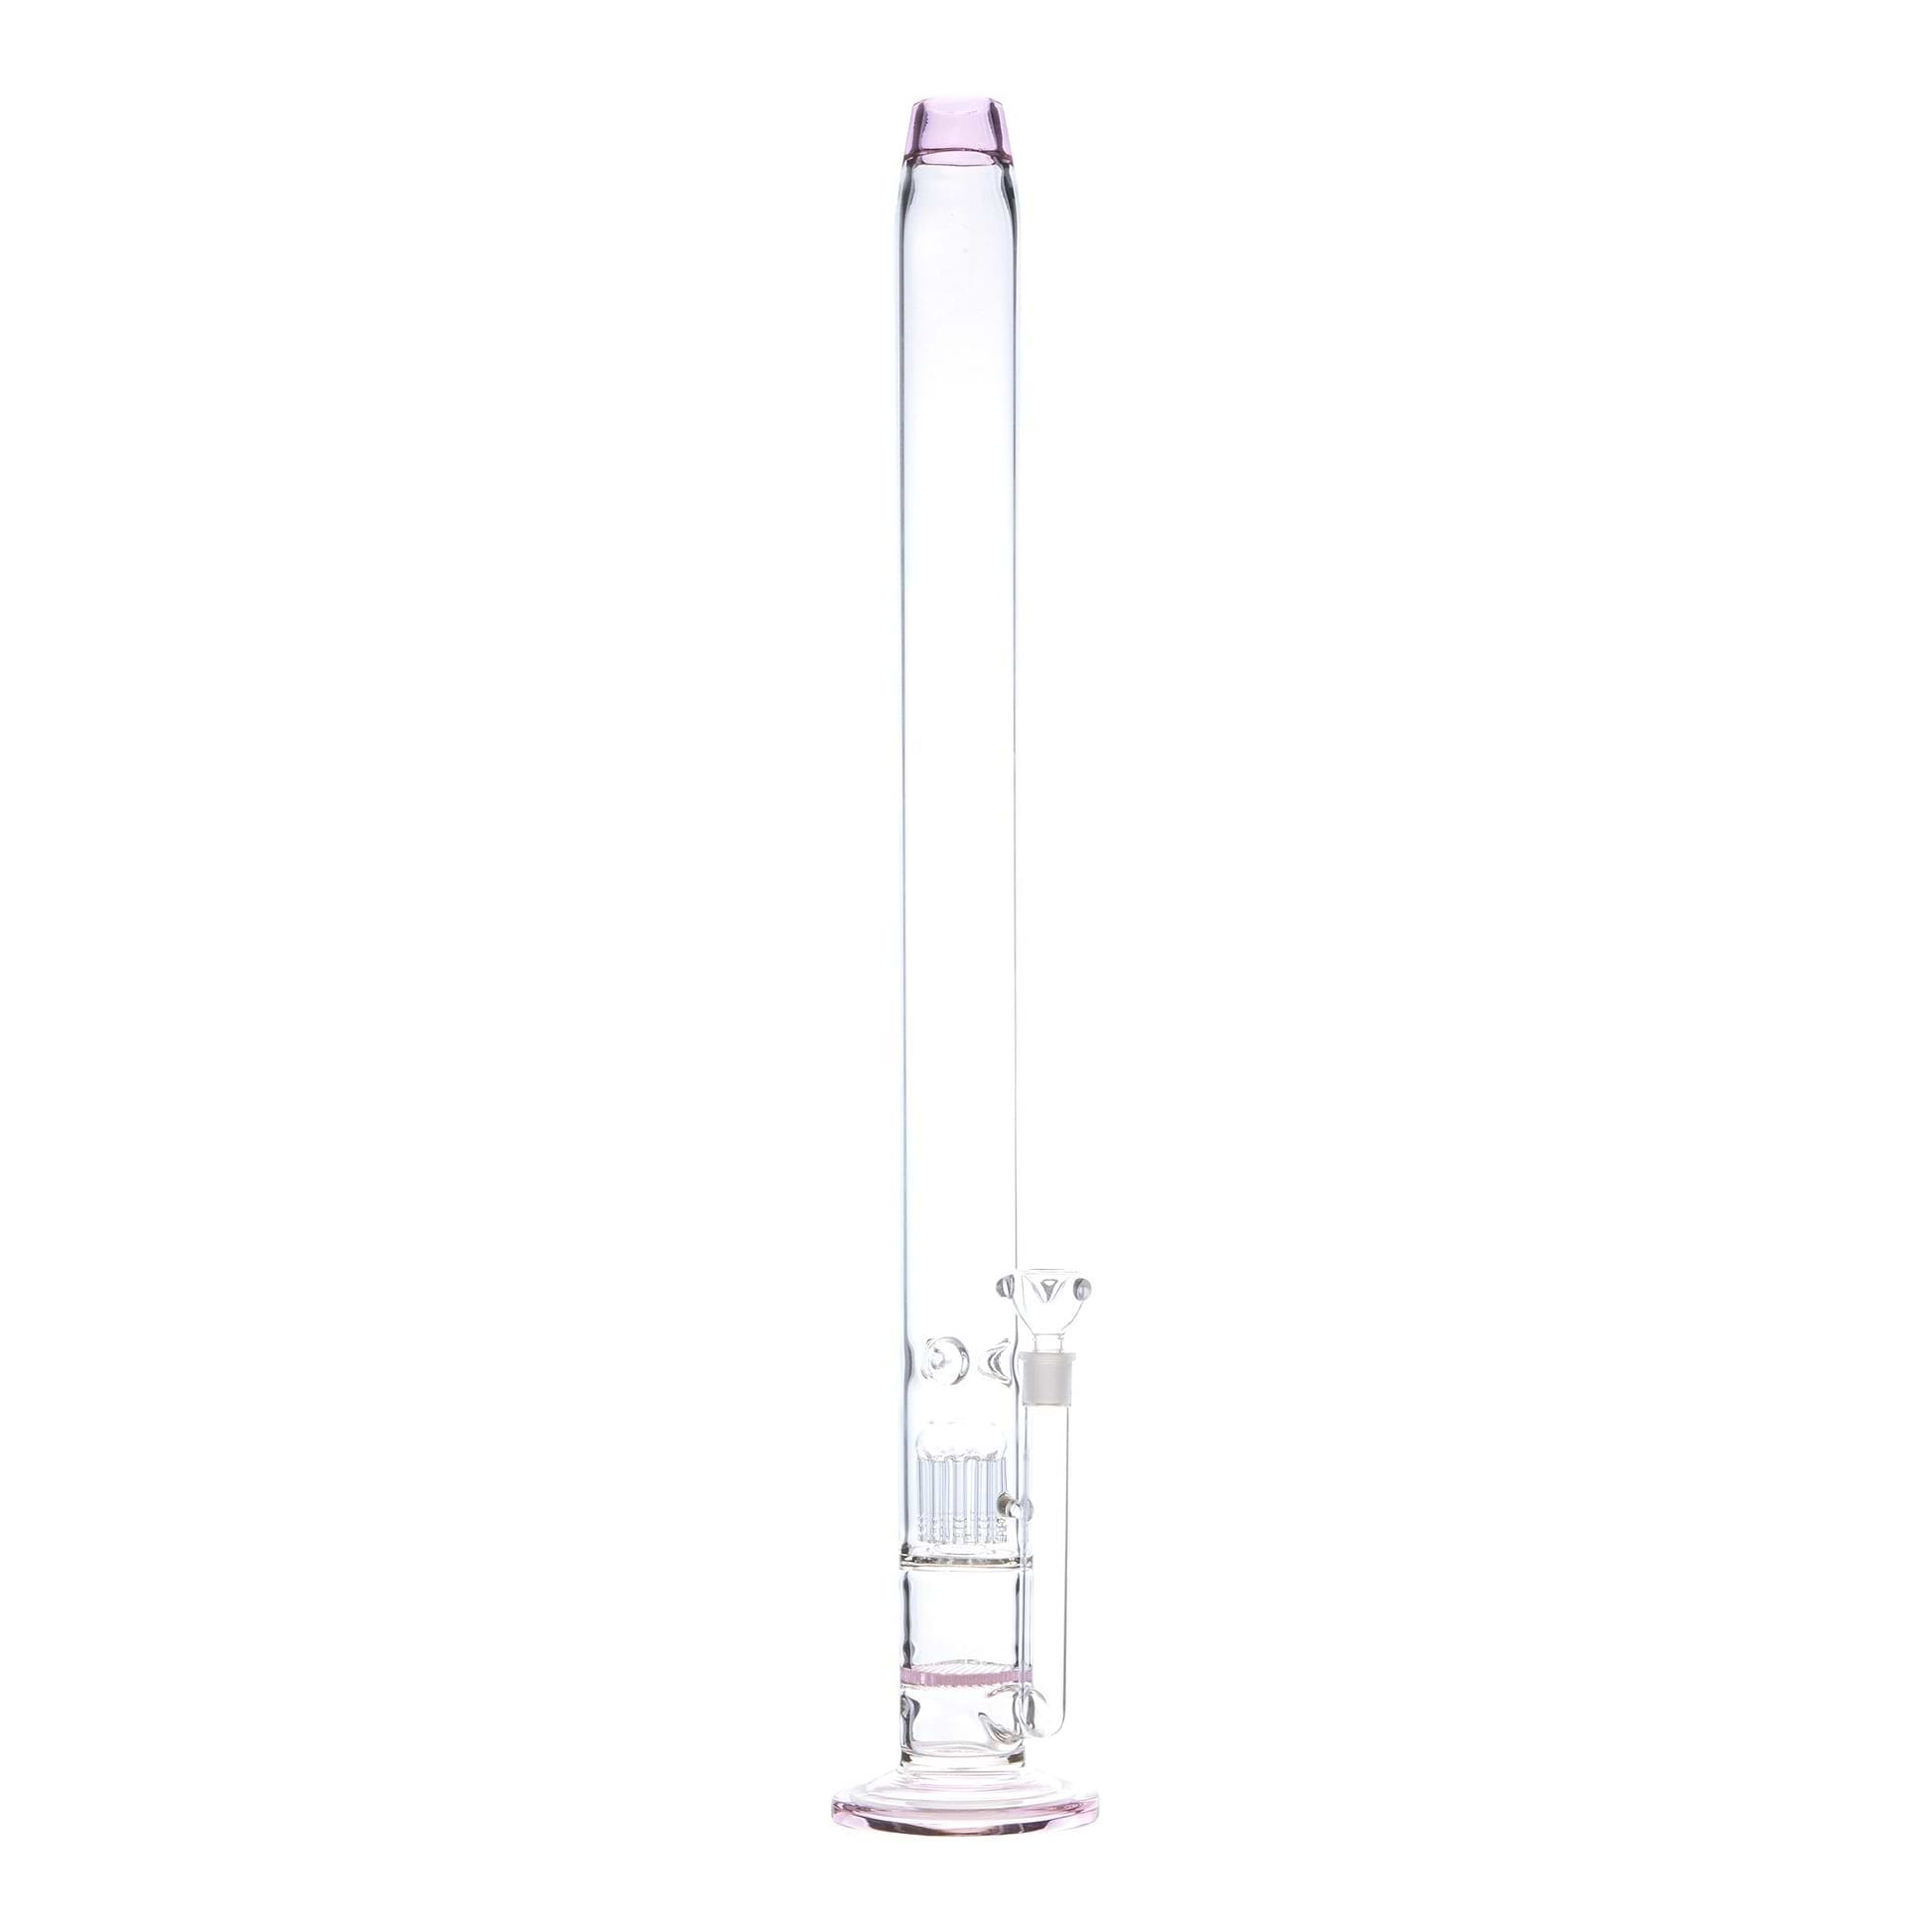 Full shot of straight glass bong smoking device with pink accents and bowl on right slightly in front